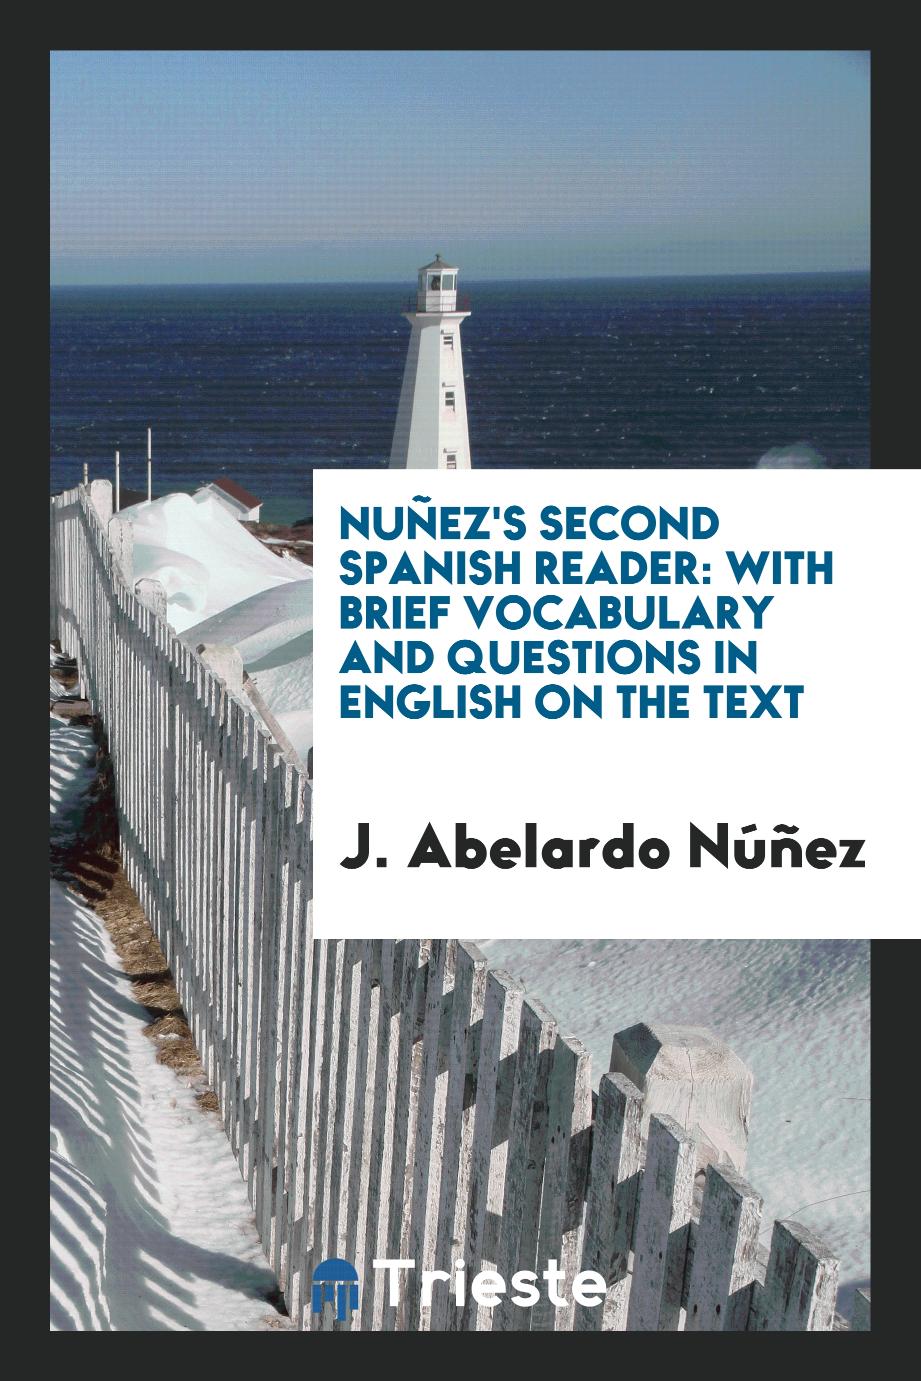 Nuñez's Second Spanish Reader: With Brief Vocabulary and Questions in English on the Text